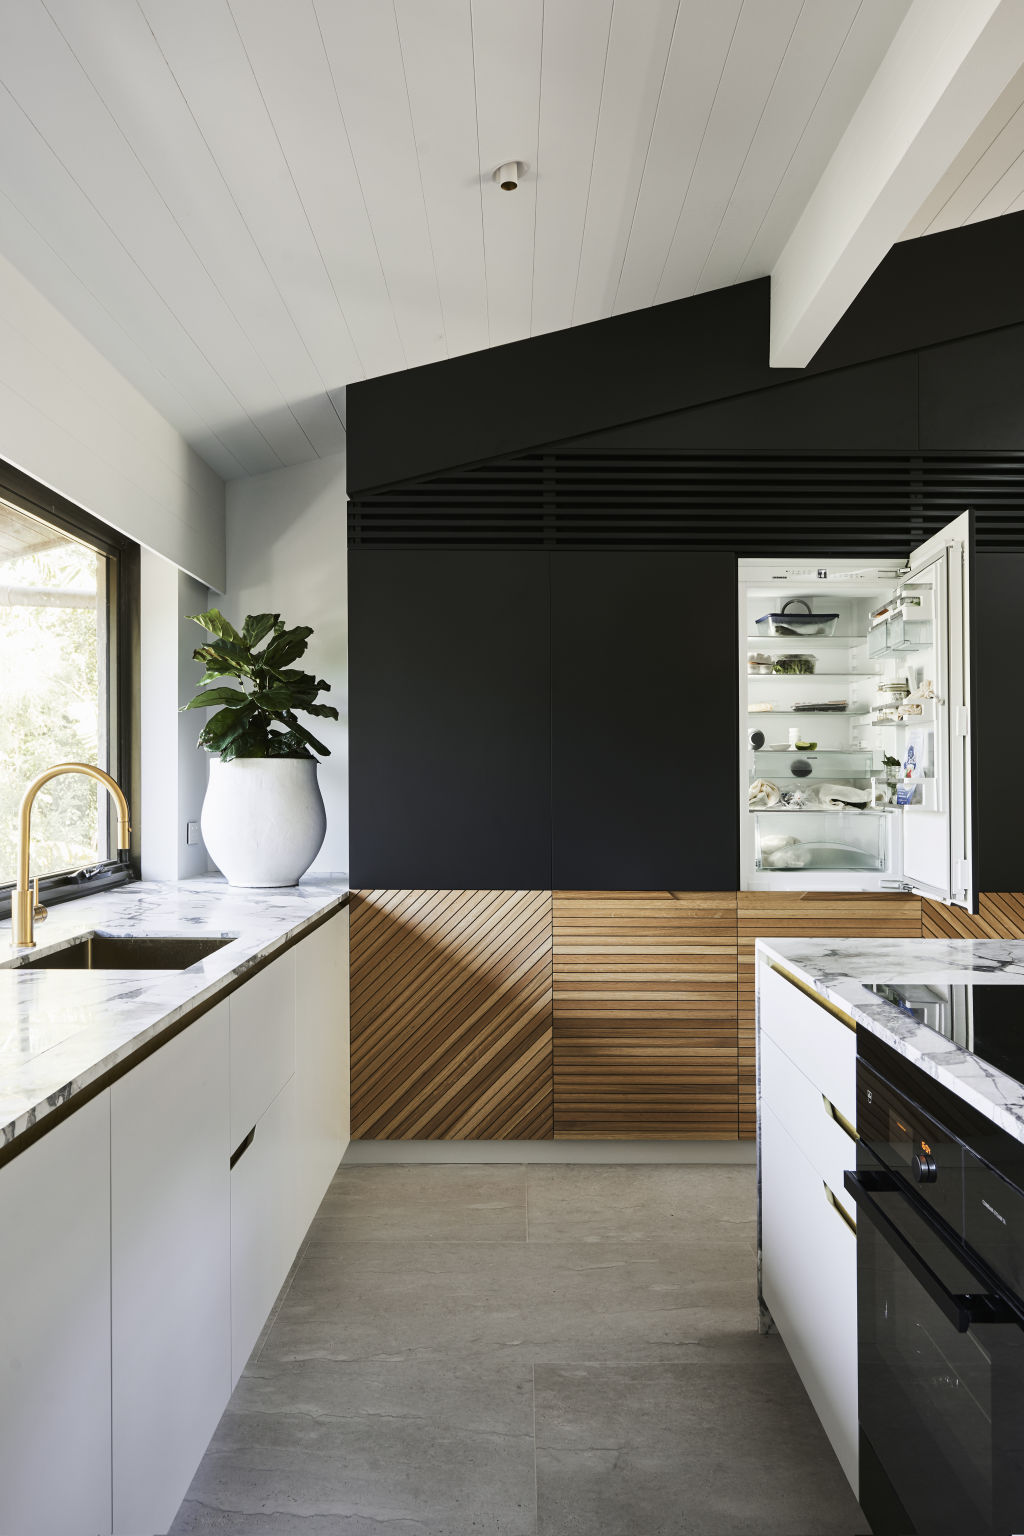 The kitchen, with brass features and a hidden fridge/freezer. The couple had to ‘get creative’ with installing an air conditioner, opting to make a design feature out of it by installing a grill above the kitchen cupboards, which broke up the tall charcoal cabinetry. Photo: Nikole Ramsay